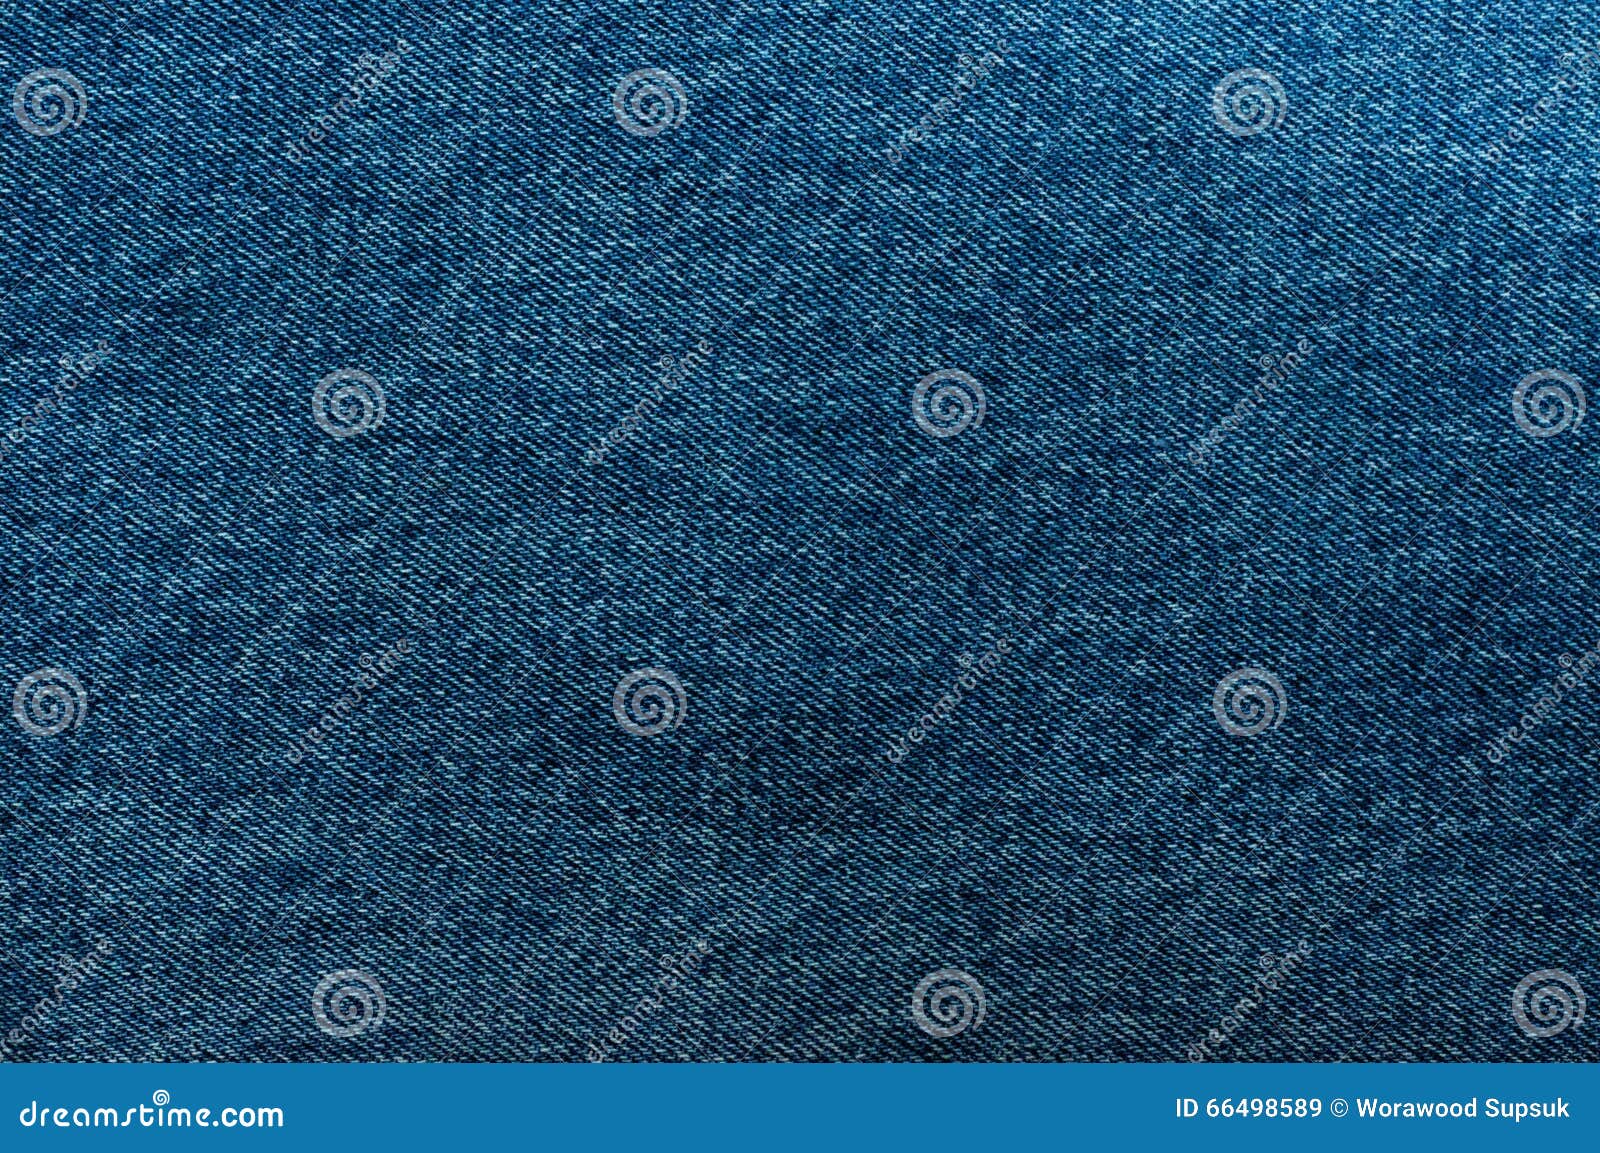 Skin Jeans stock image. Image of markings, color, surfaces - 66498589